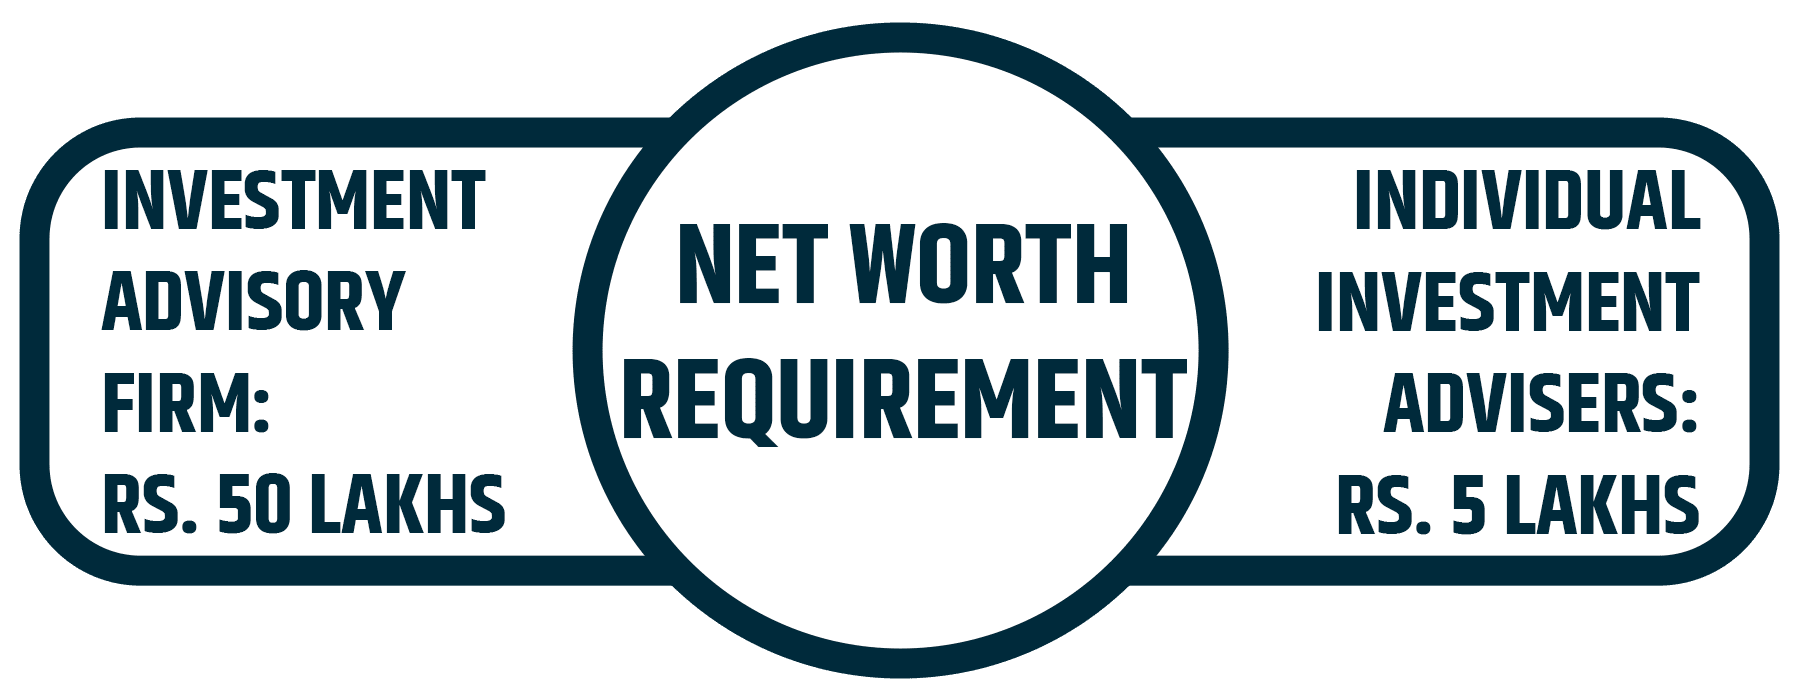 Net worth of the RIA Certification applicant